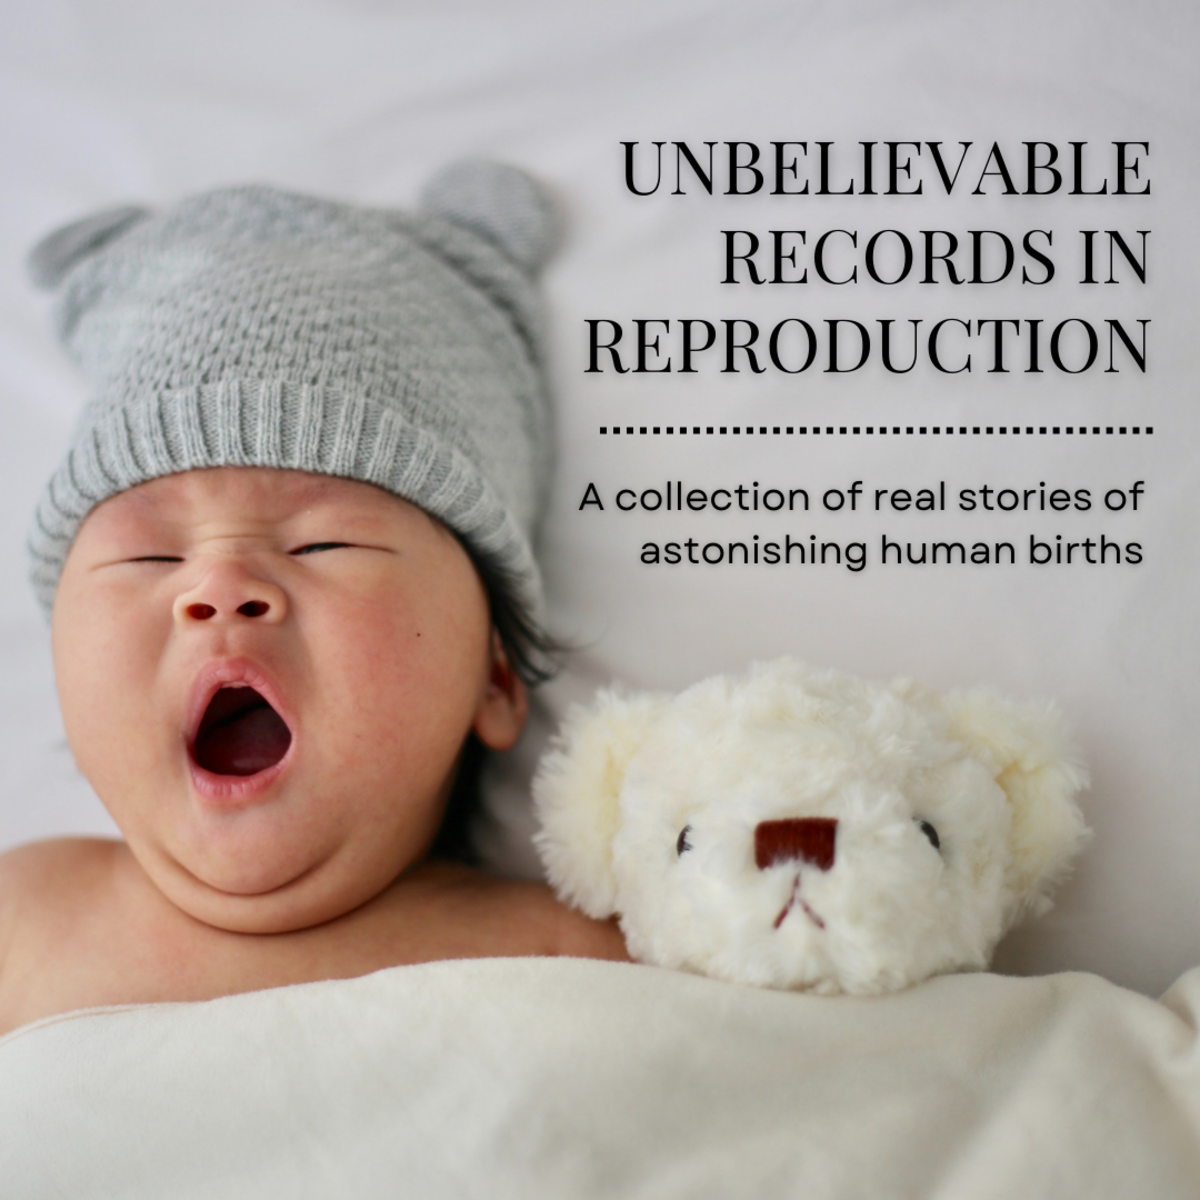 This article will take a look at a handful of amazing records in human reproduction, including the youngest parents in history and the most babies born to one woman.